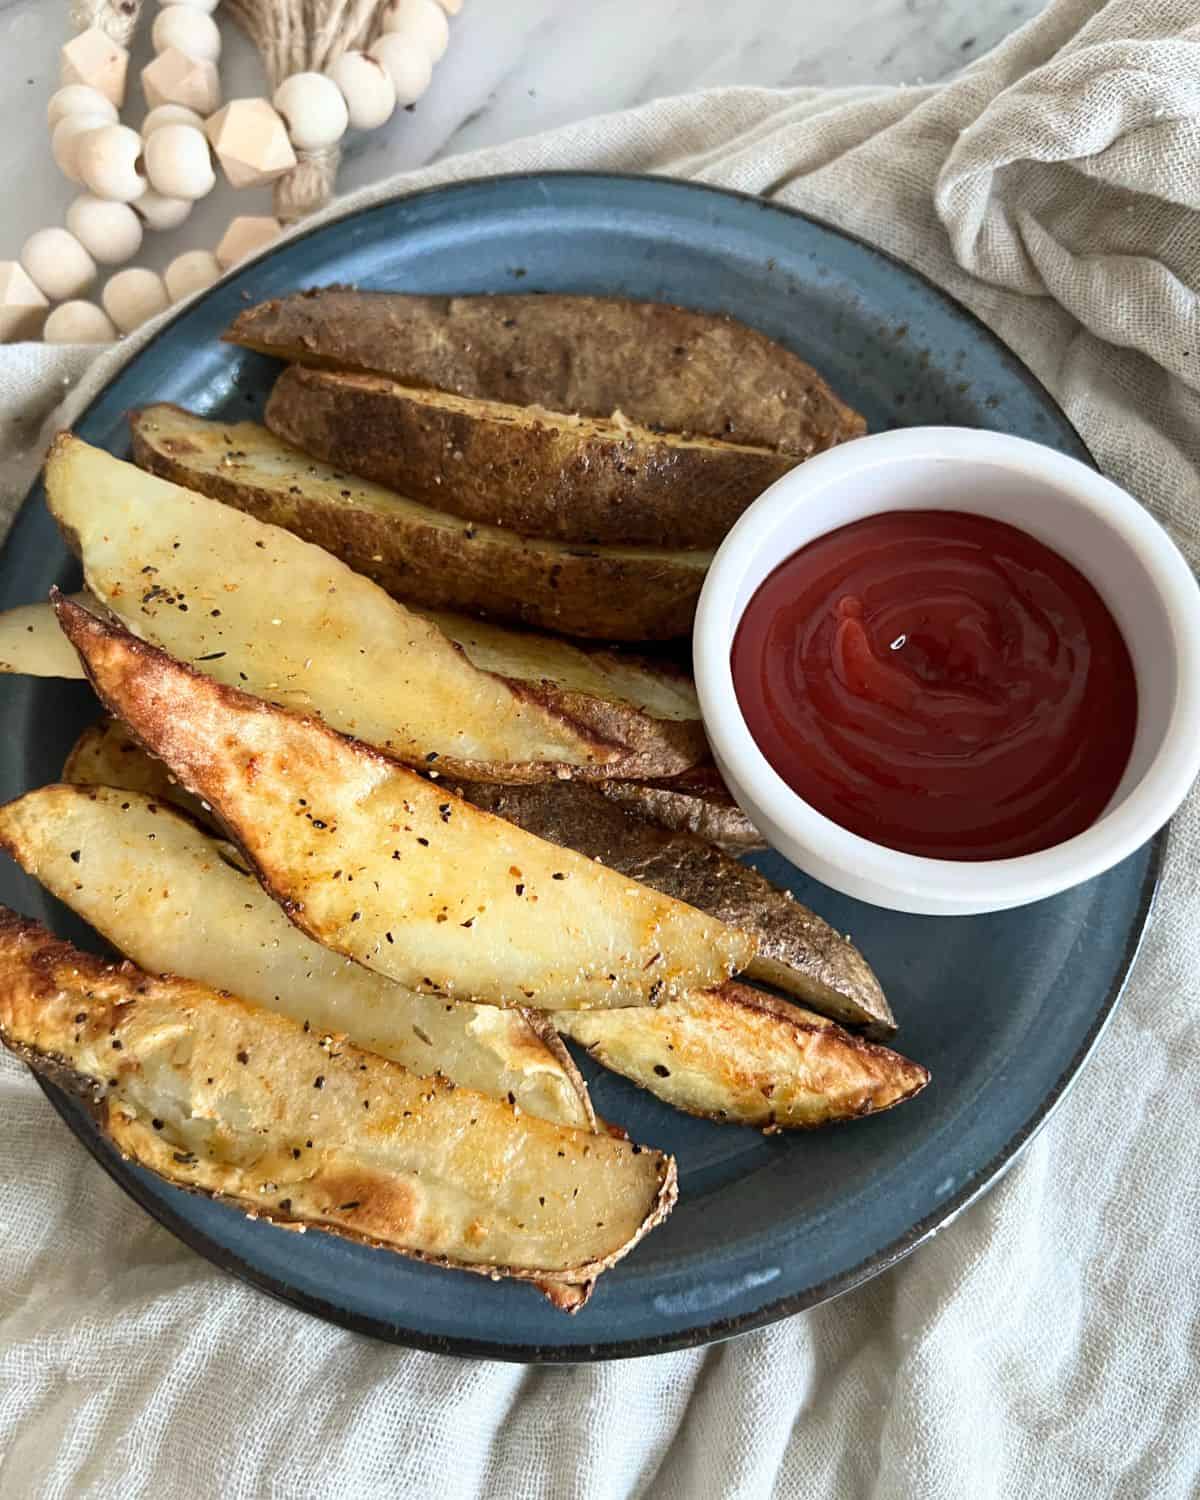 Crispy golden brown seasoned potato wedges from the air fryer next to ketchup. 